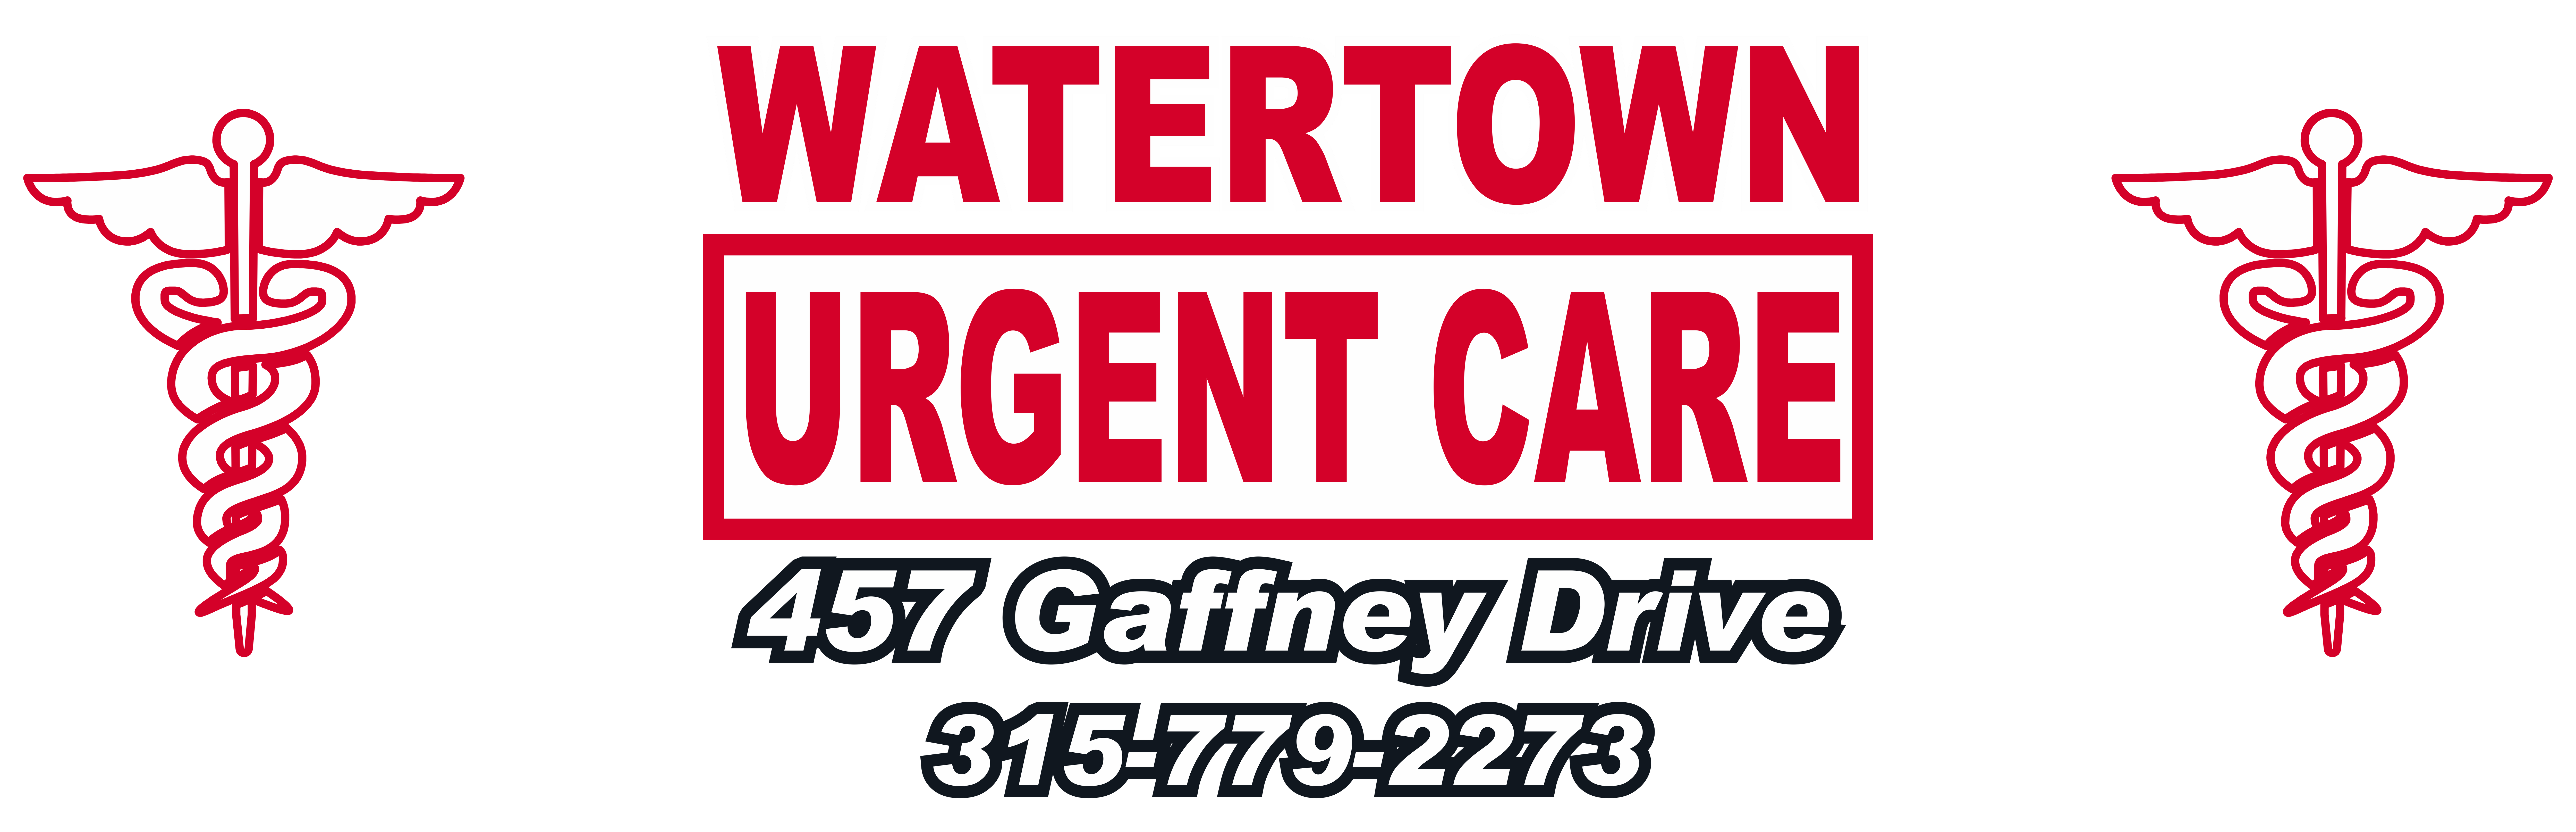 Watertown Urgent Care with Address